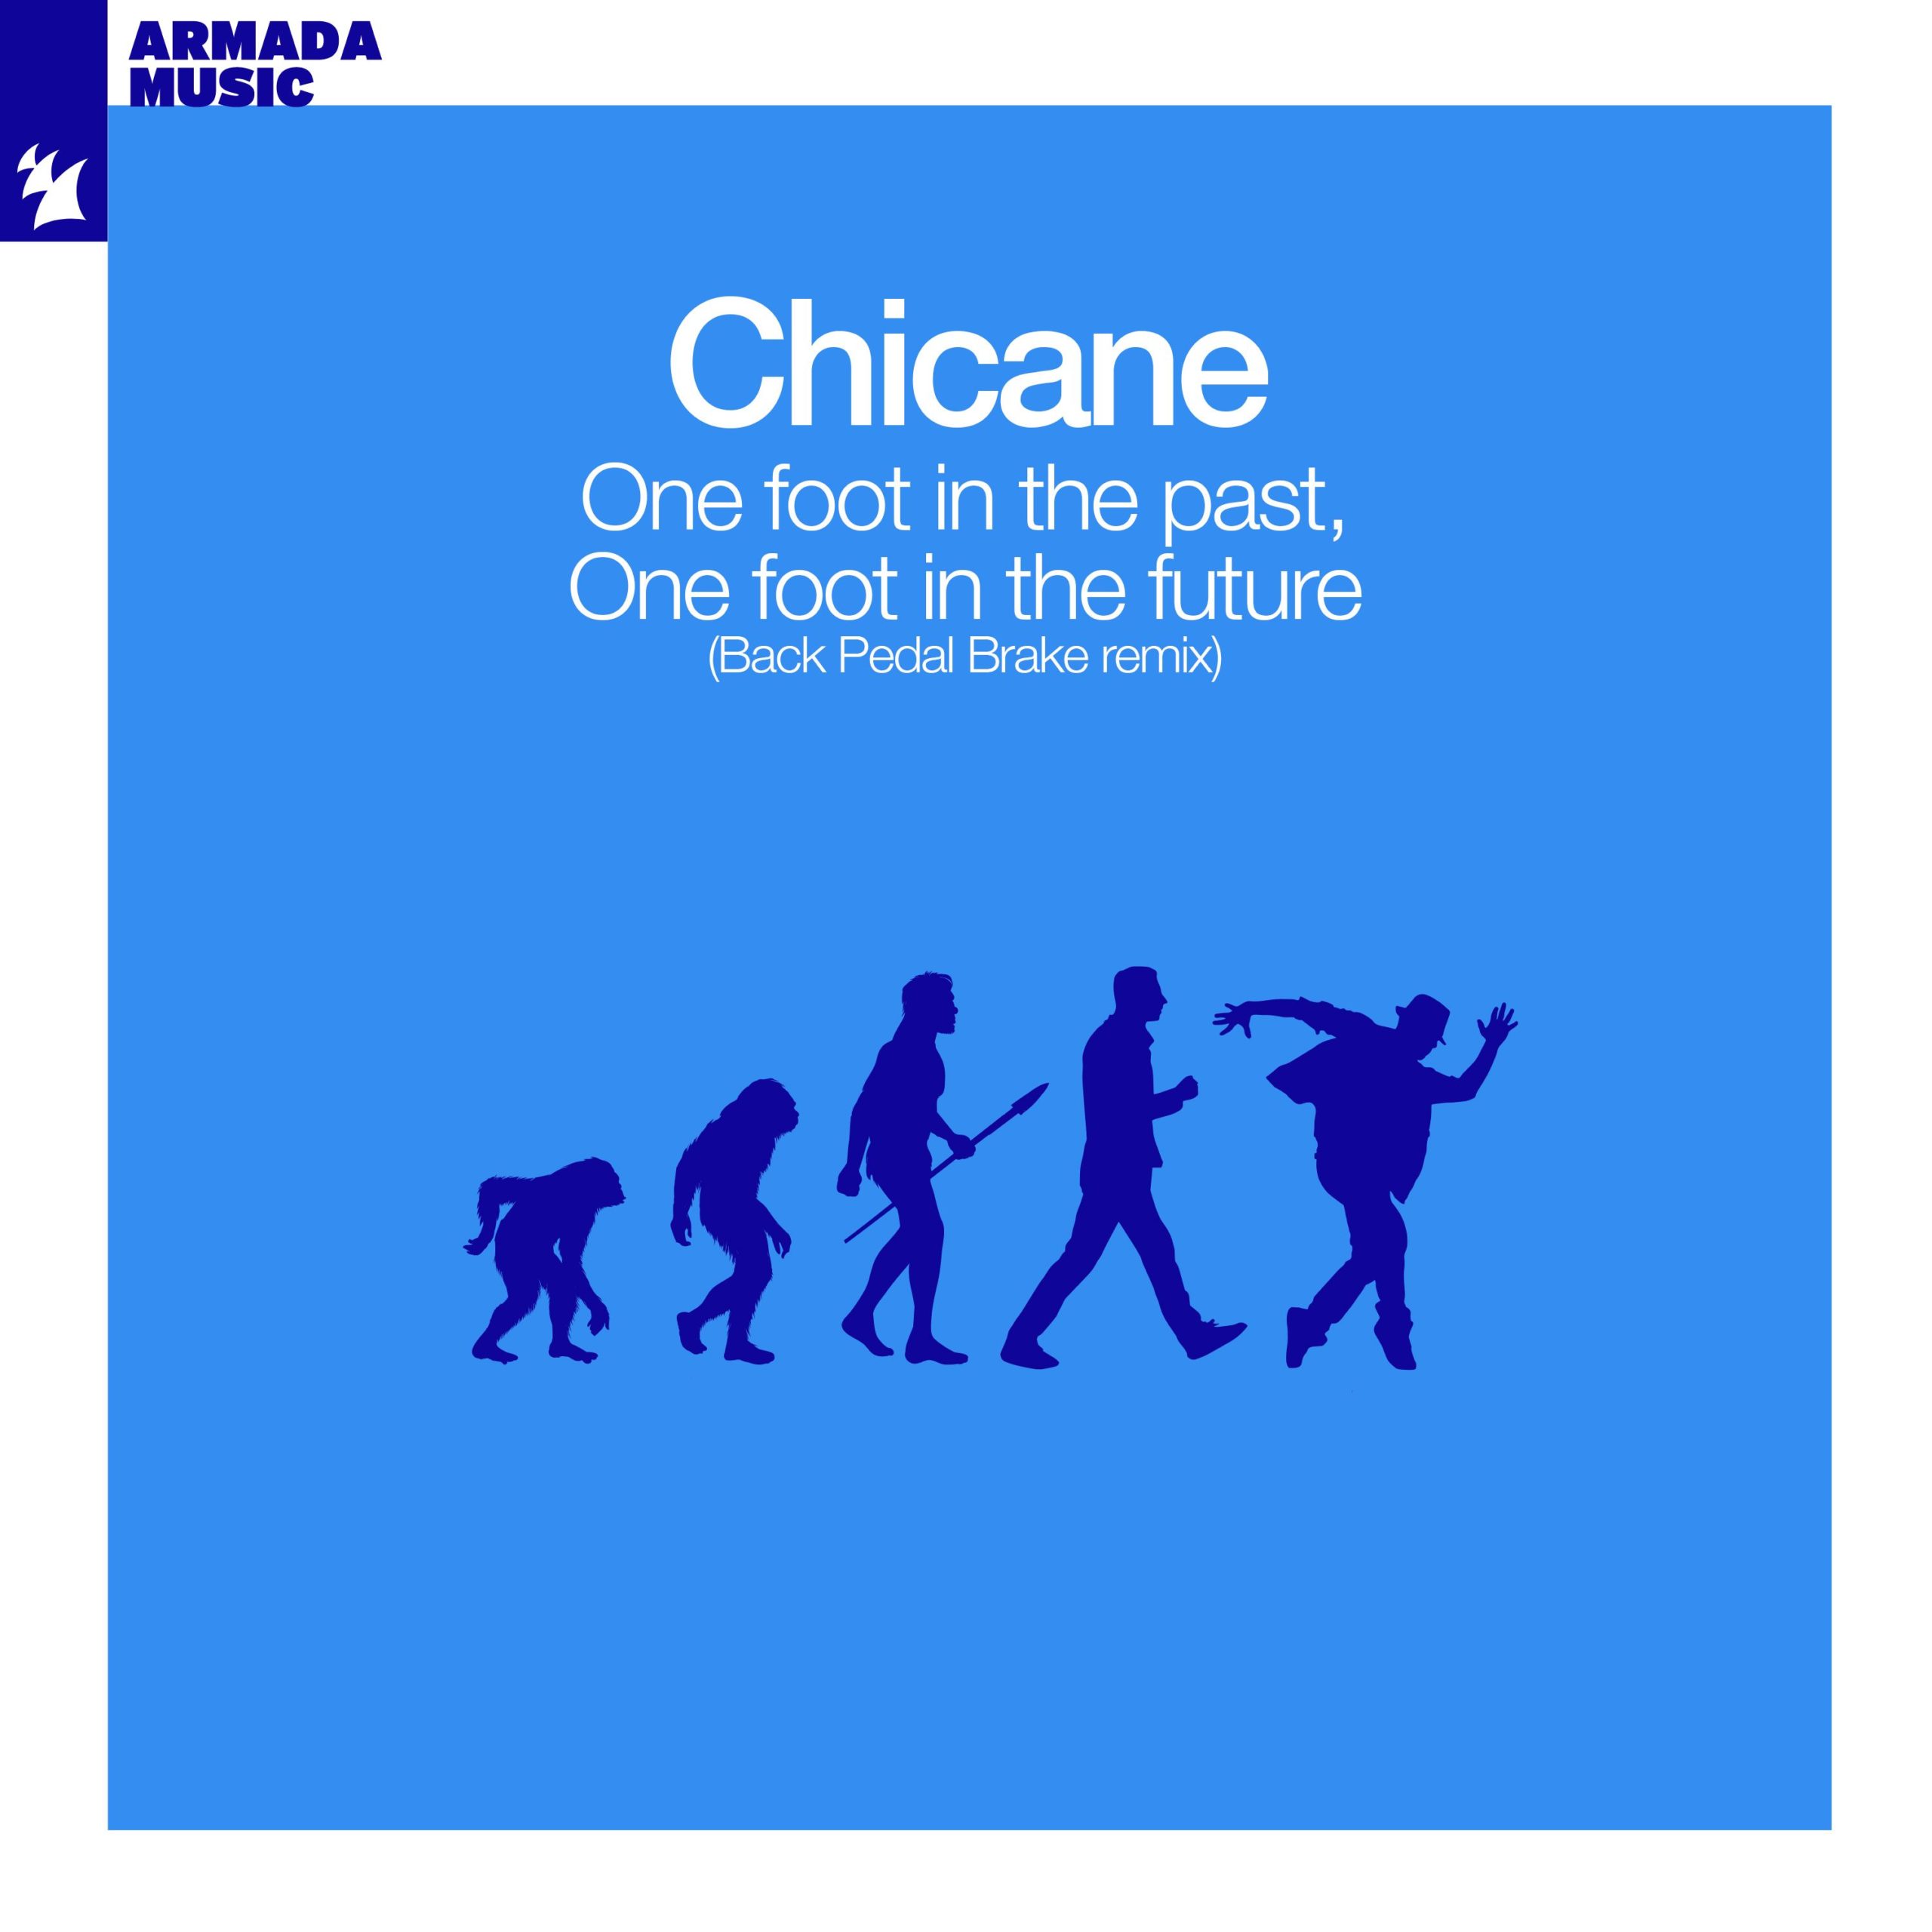 Chicane presents One Foot In The Past, One Foot In The Future (Back Pedal Brake Remix) on Modena Records